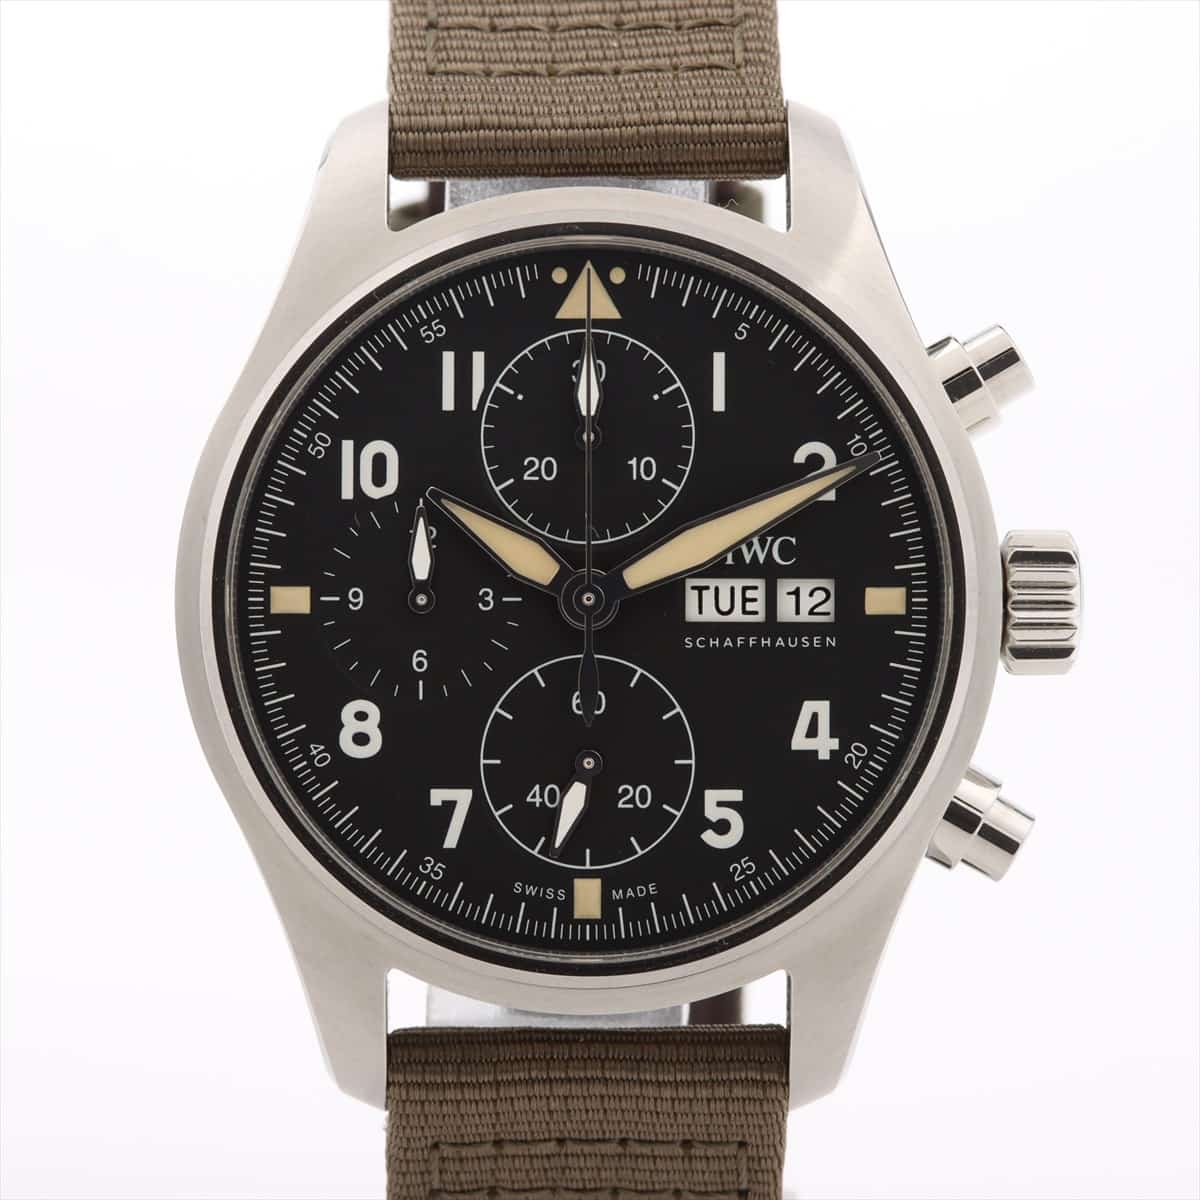 IWC Pilot Watch Chronograph Spitfire IW387901 SS & Nylon AT Black-Face